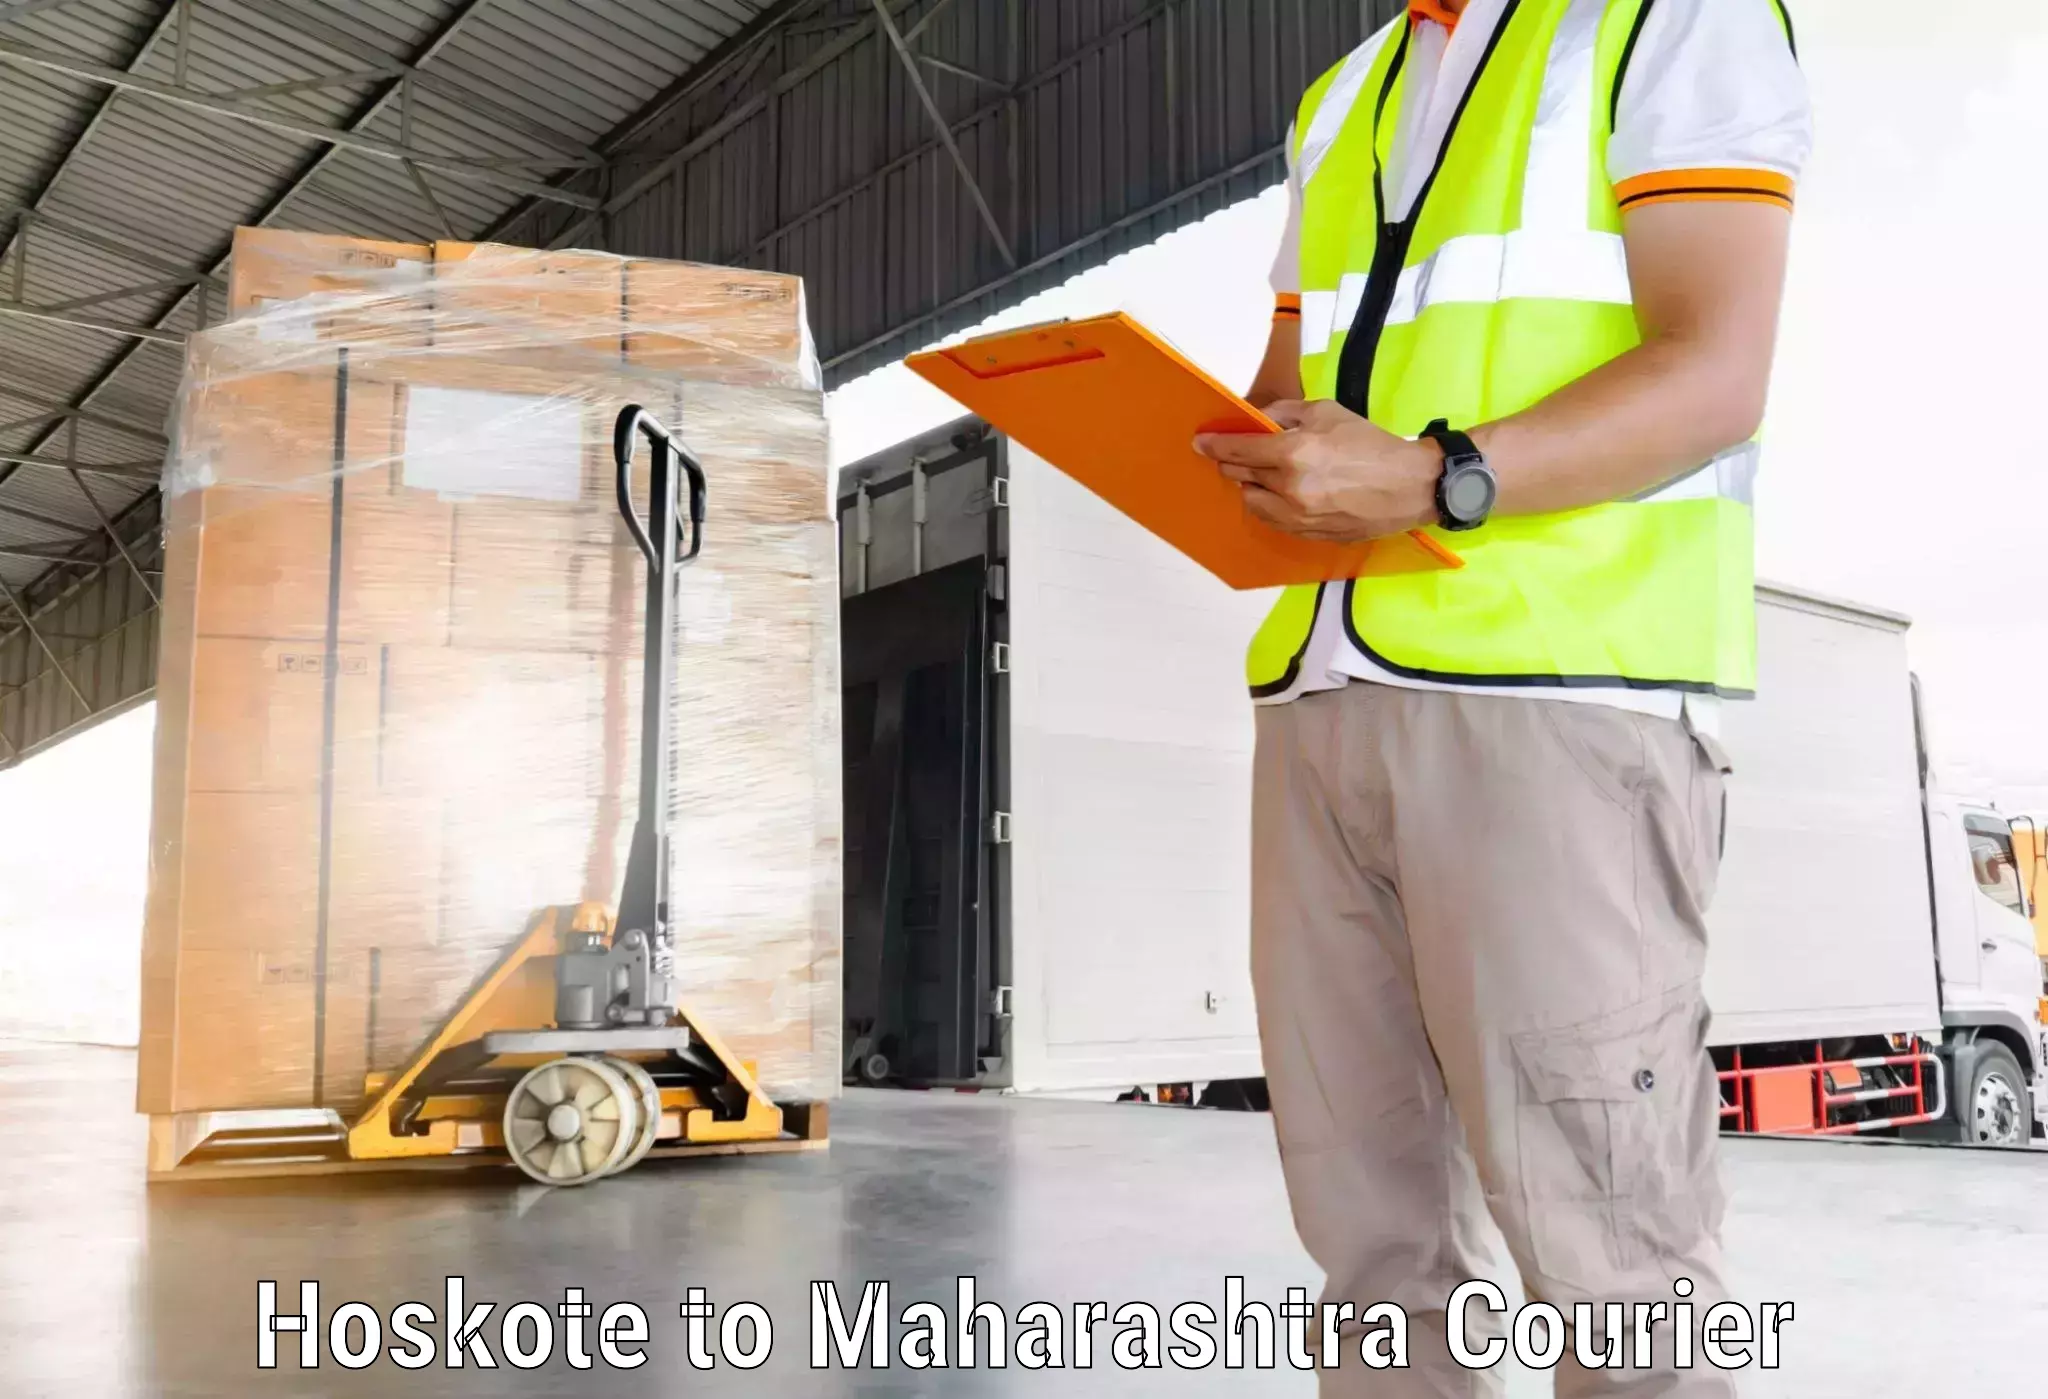 On-demand courier Hoskote to Mahad